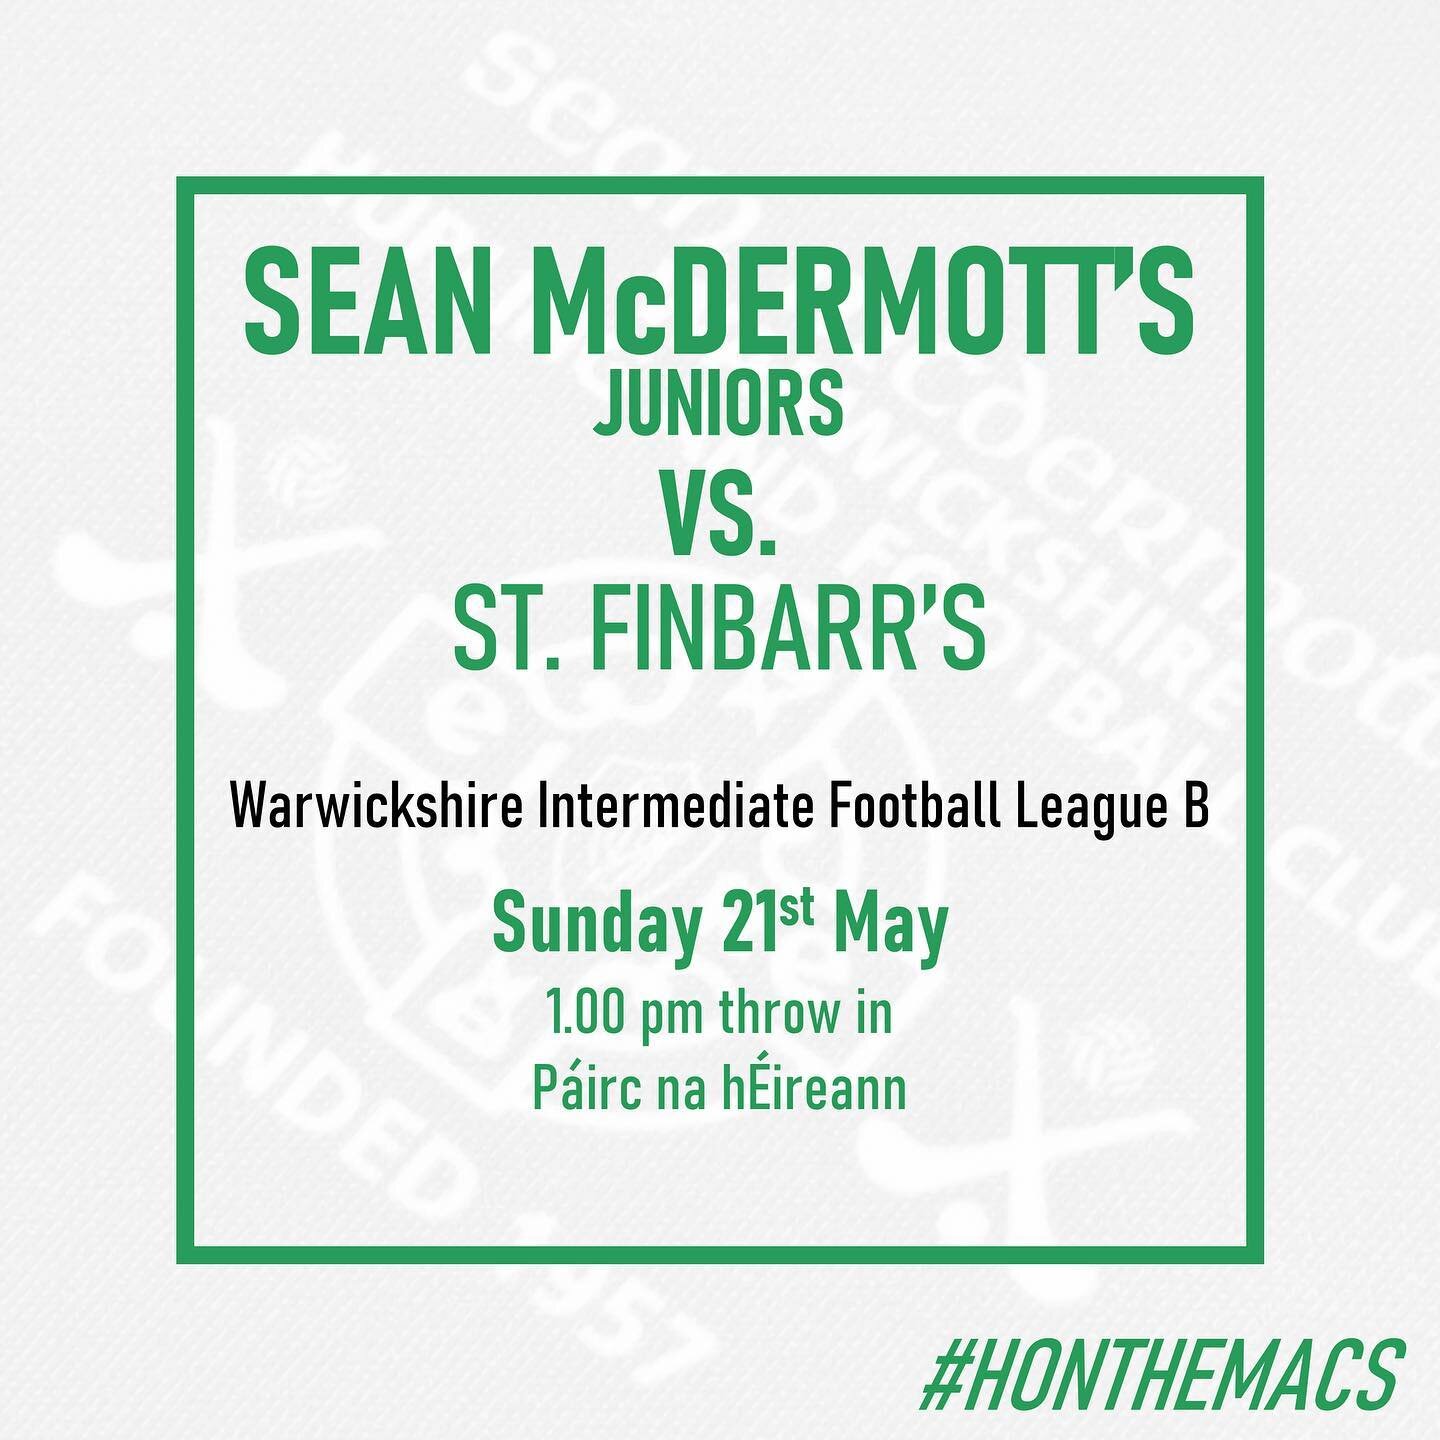 The league campaign continues for our juniors tomorrow as they face St. Finbarr's at P&aacute;irc na h&Eacute;ireann, a 1pm throw in. 

#honthemacs